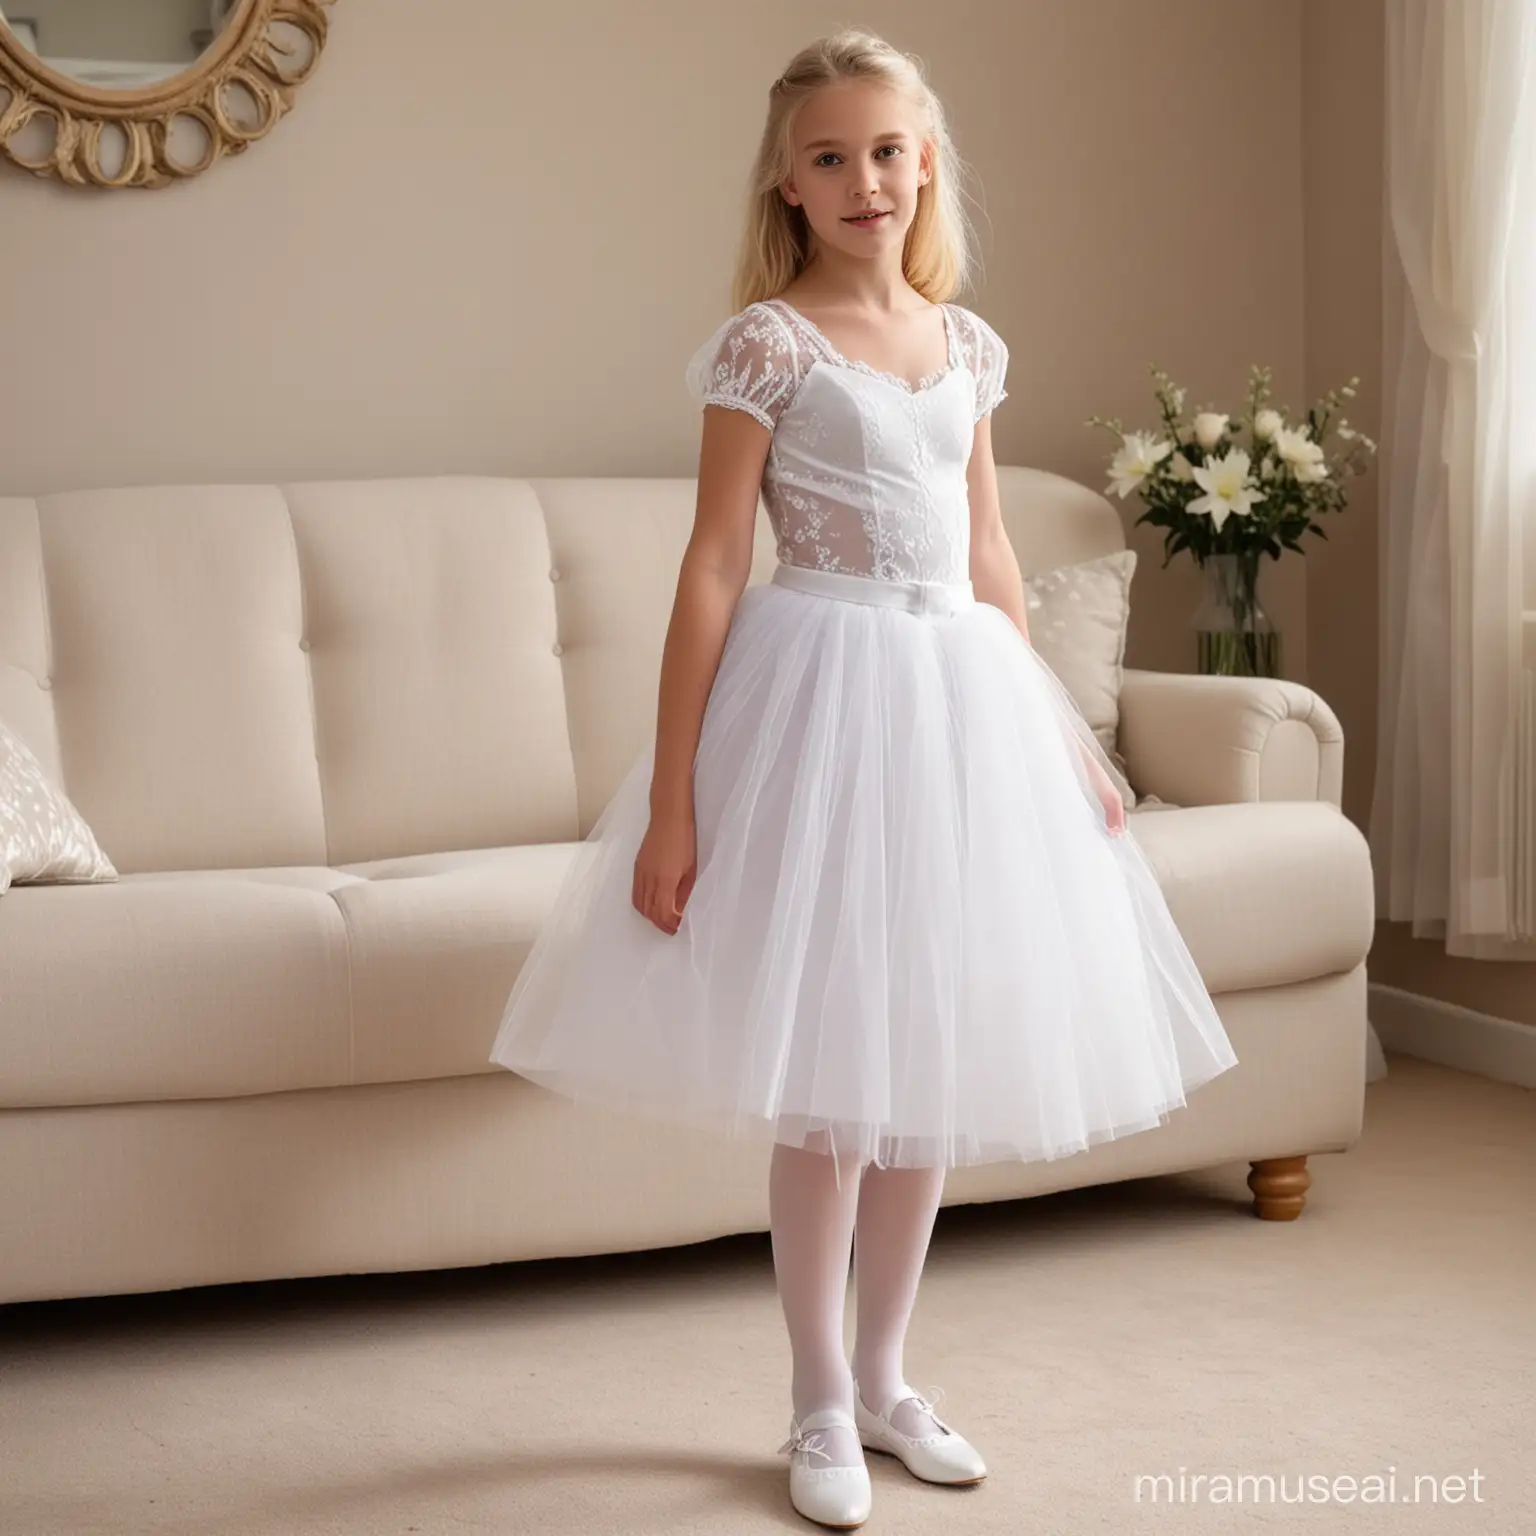 Elegant Young Girl in Communion Attire Graceful Pose in Living Room Setting